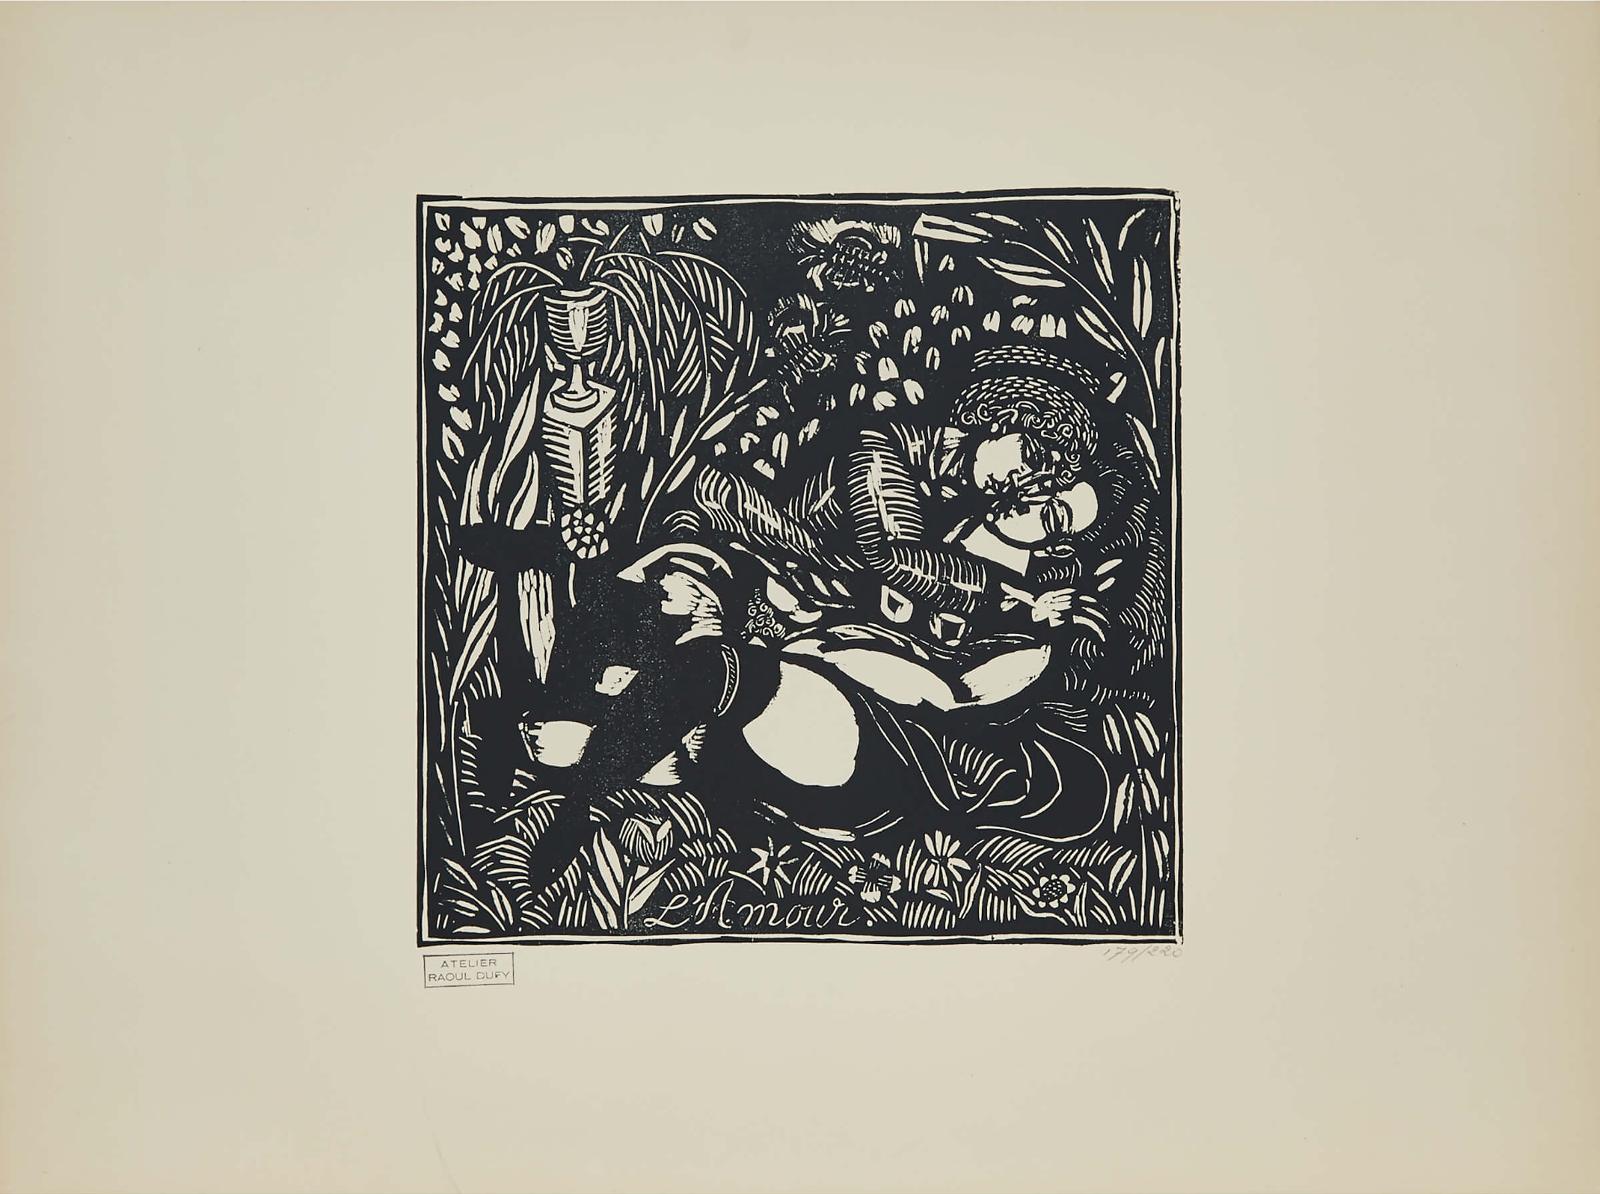 Raoul Dufy (1877-1953) - La Peche; L'amour (From L'amour), 1910-1911, 2nd Edition, Printed Later, 1953